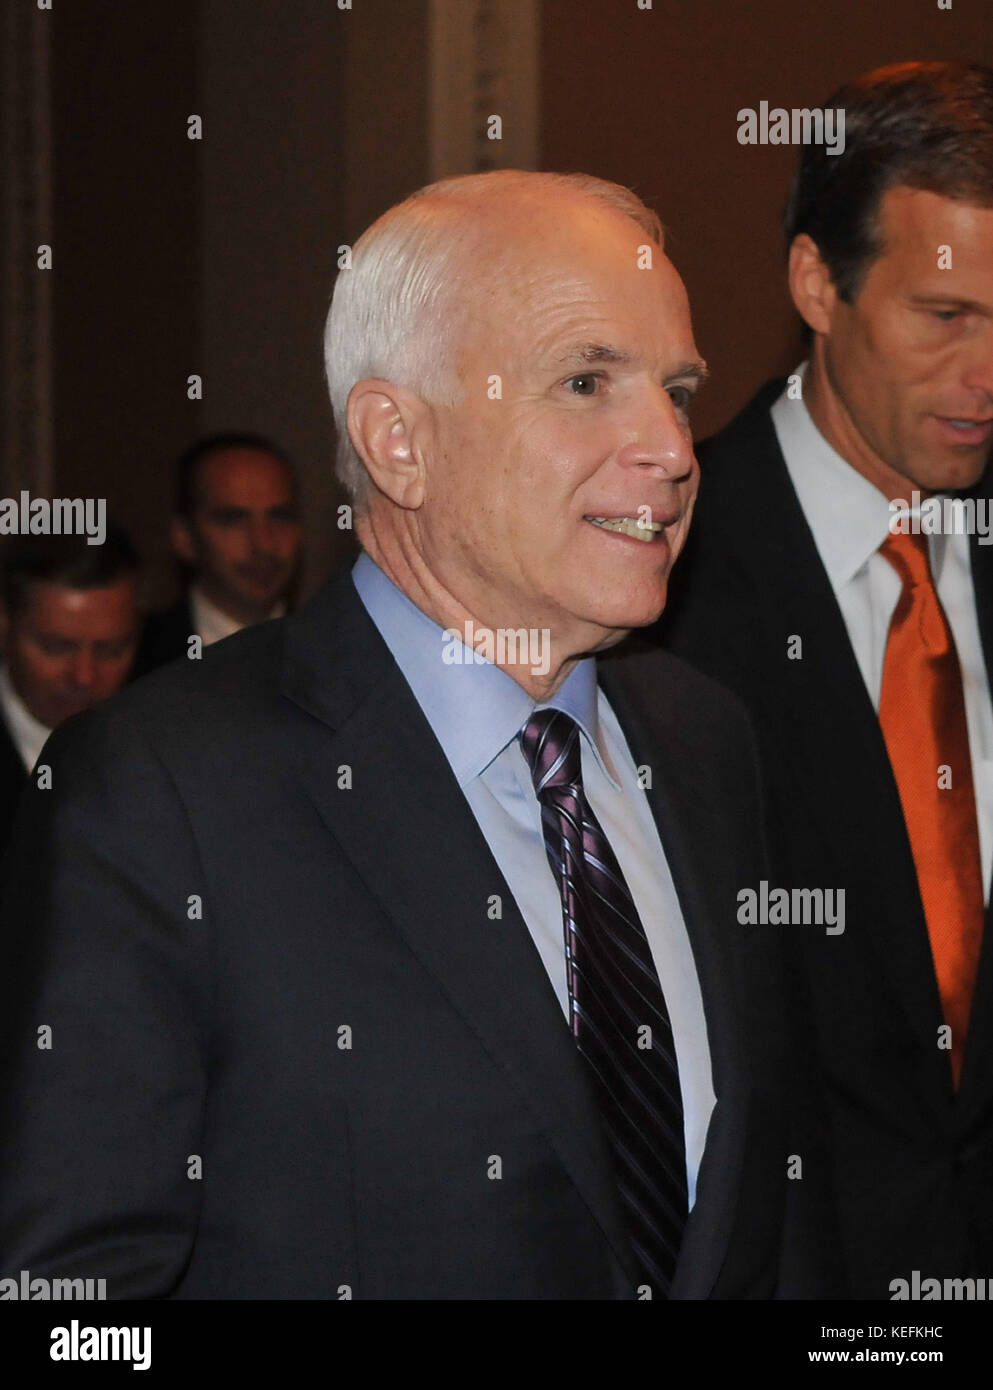 Washington, DC - October 1, 2008 -- United States Senators John McCain (Republican of Arizona) arrives at the United States Senate Chamber in the United States Capitol for the votes on the 700 billion dollar Wall Street bail-out package in Washington, D.C. on Wednesday, October 1, 2008..Credit: Ron Sachs / CNP.(RESTRICTION: NO New York or New Jersey Newspapers or newspapers within a 75 mile radius of New York City) /MediaPunch Stock Photo